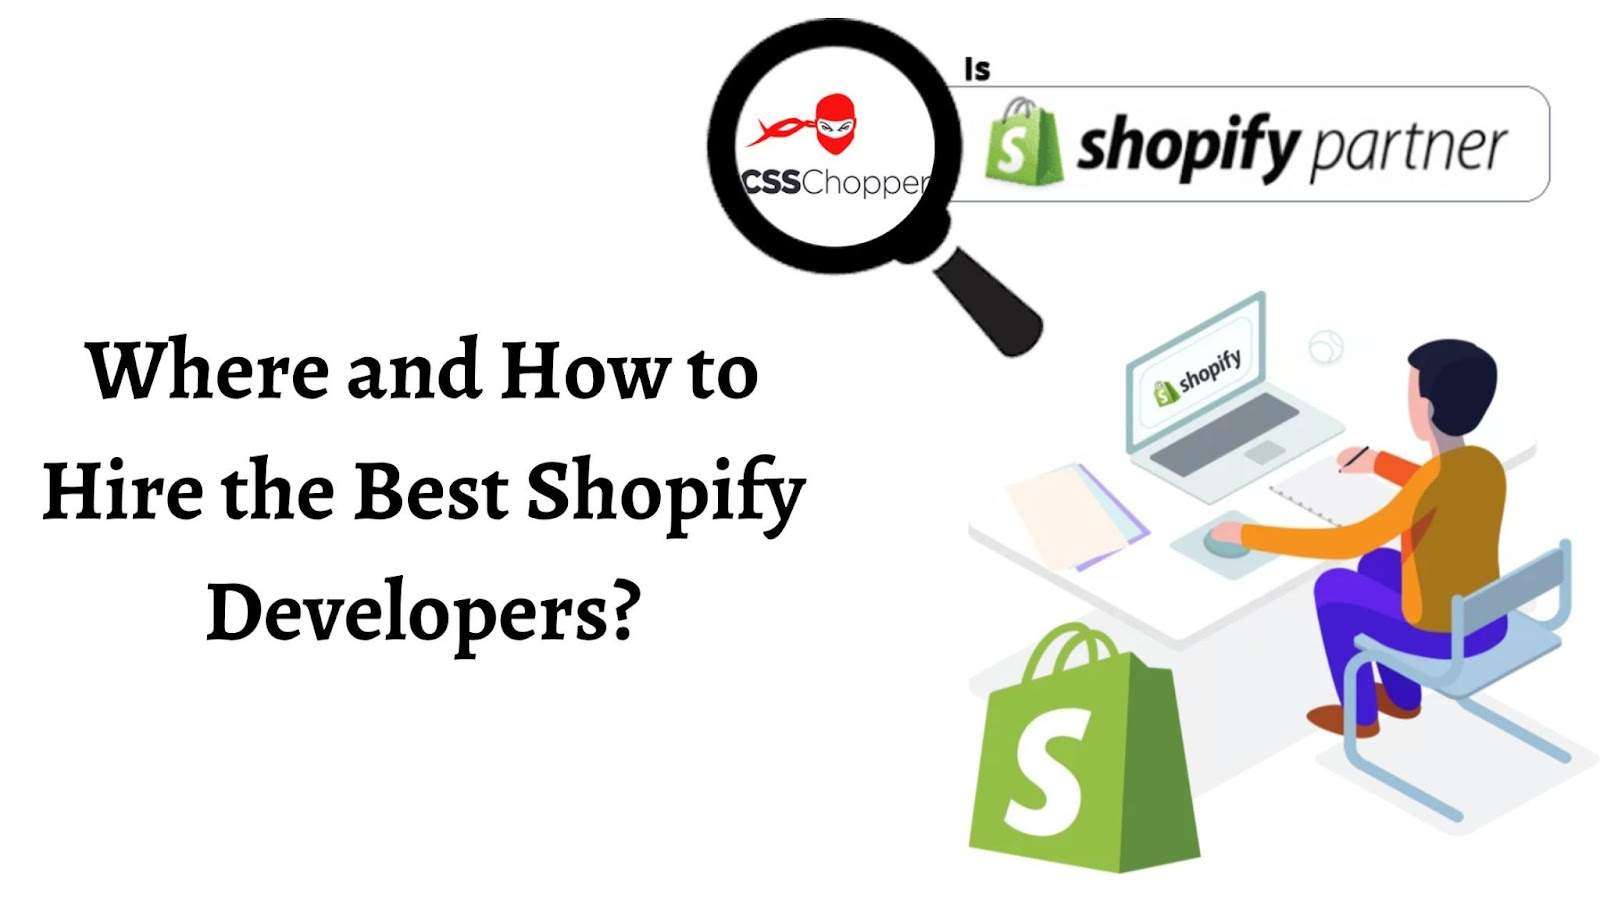 Where and How to Hire the Best Shopify Developers?